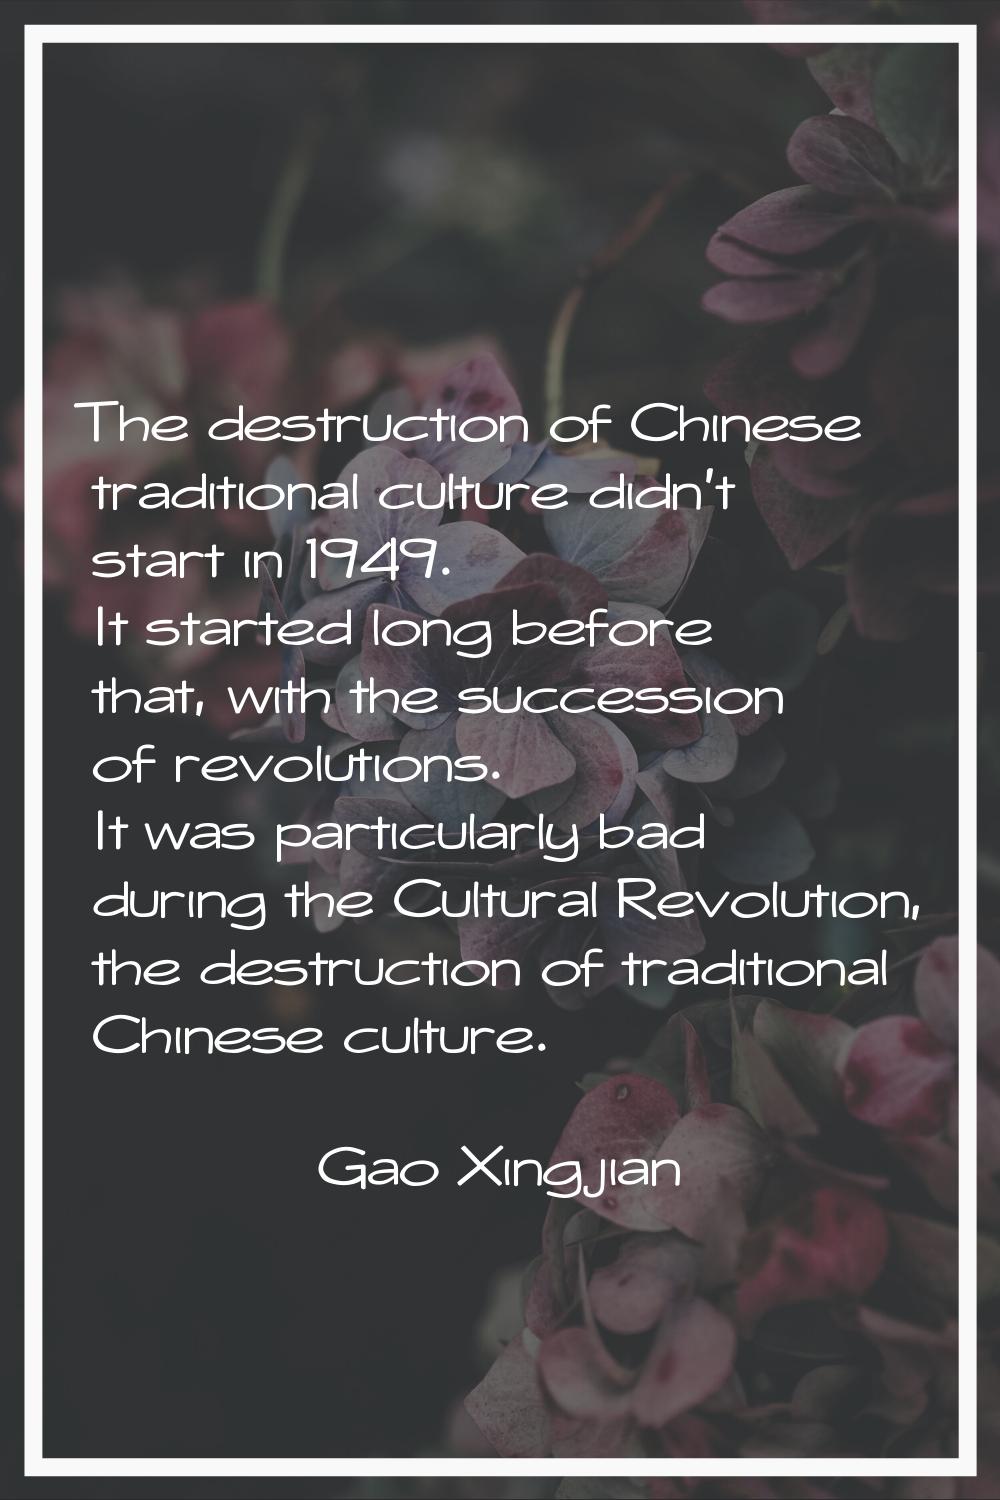 The destruction of Chinese traditional culture didn't start in 1949. It started long before that, w